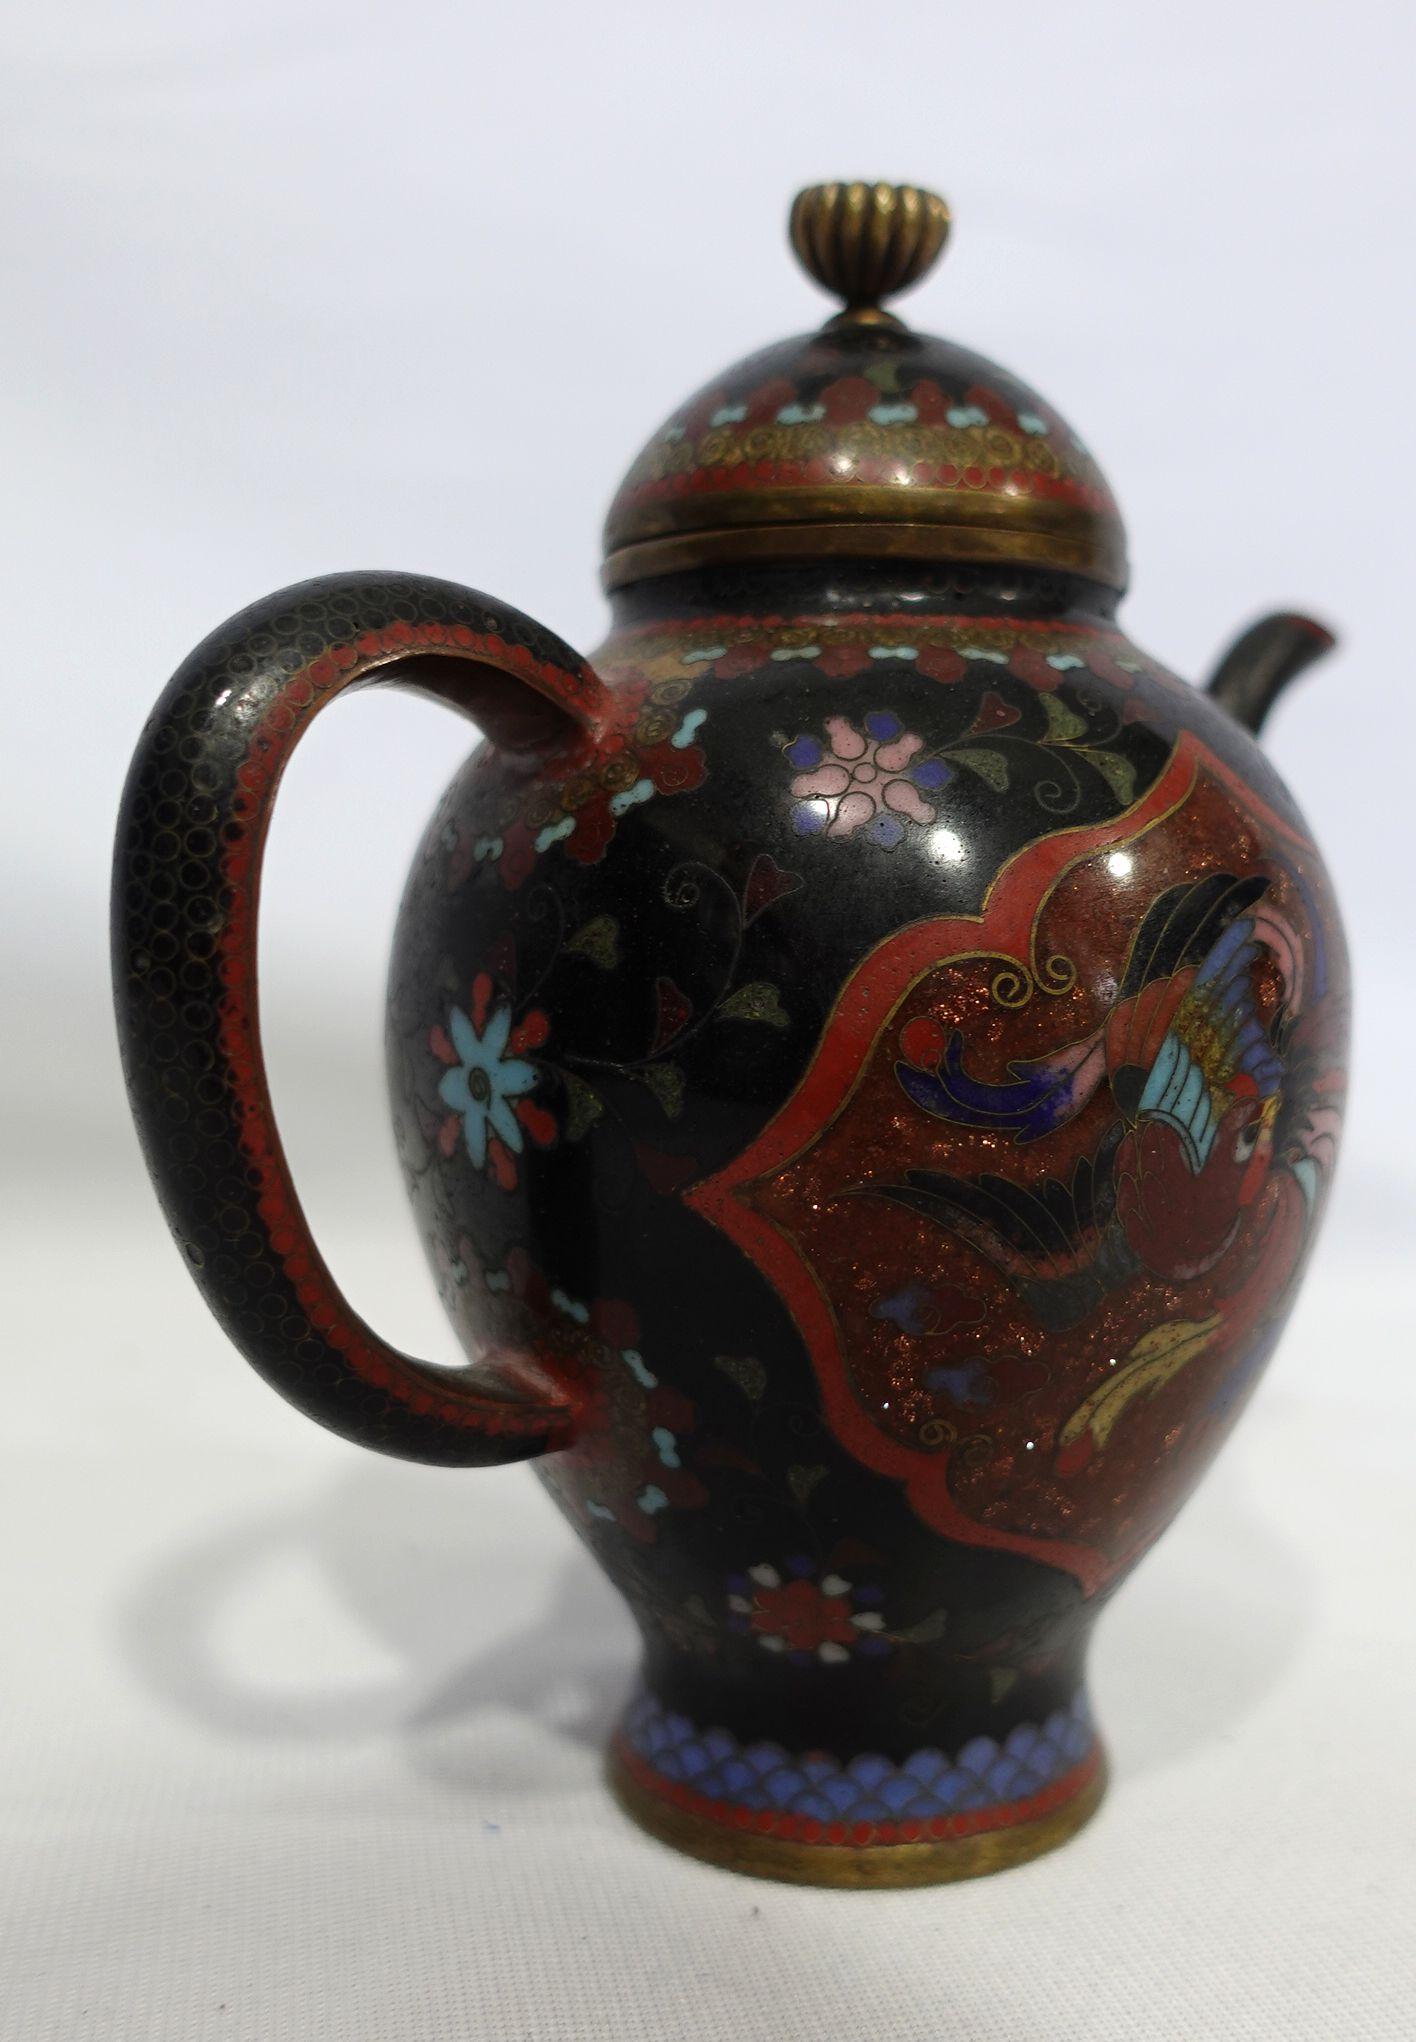 Antique Japanese Cloisonné Meiji Period Dragon Teapot CO#06 In Good Condition For Sale In Norton, MA